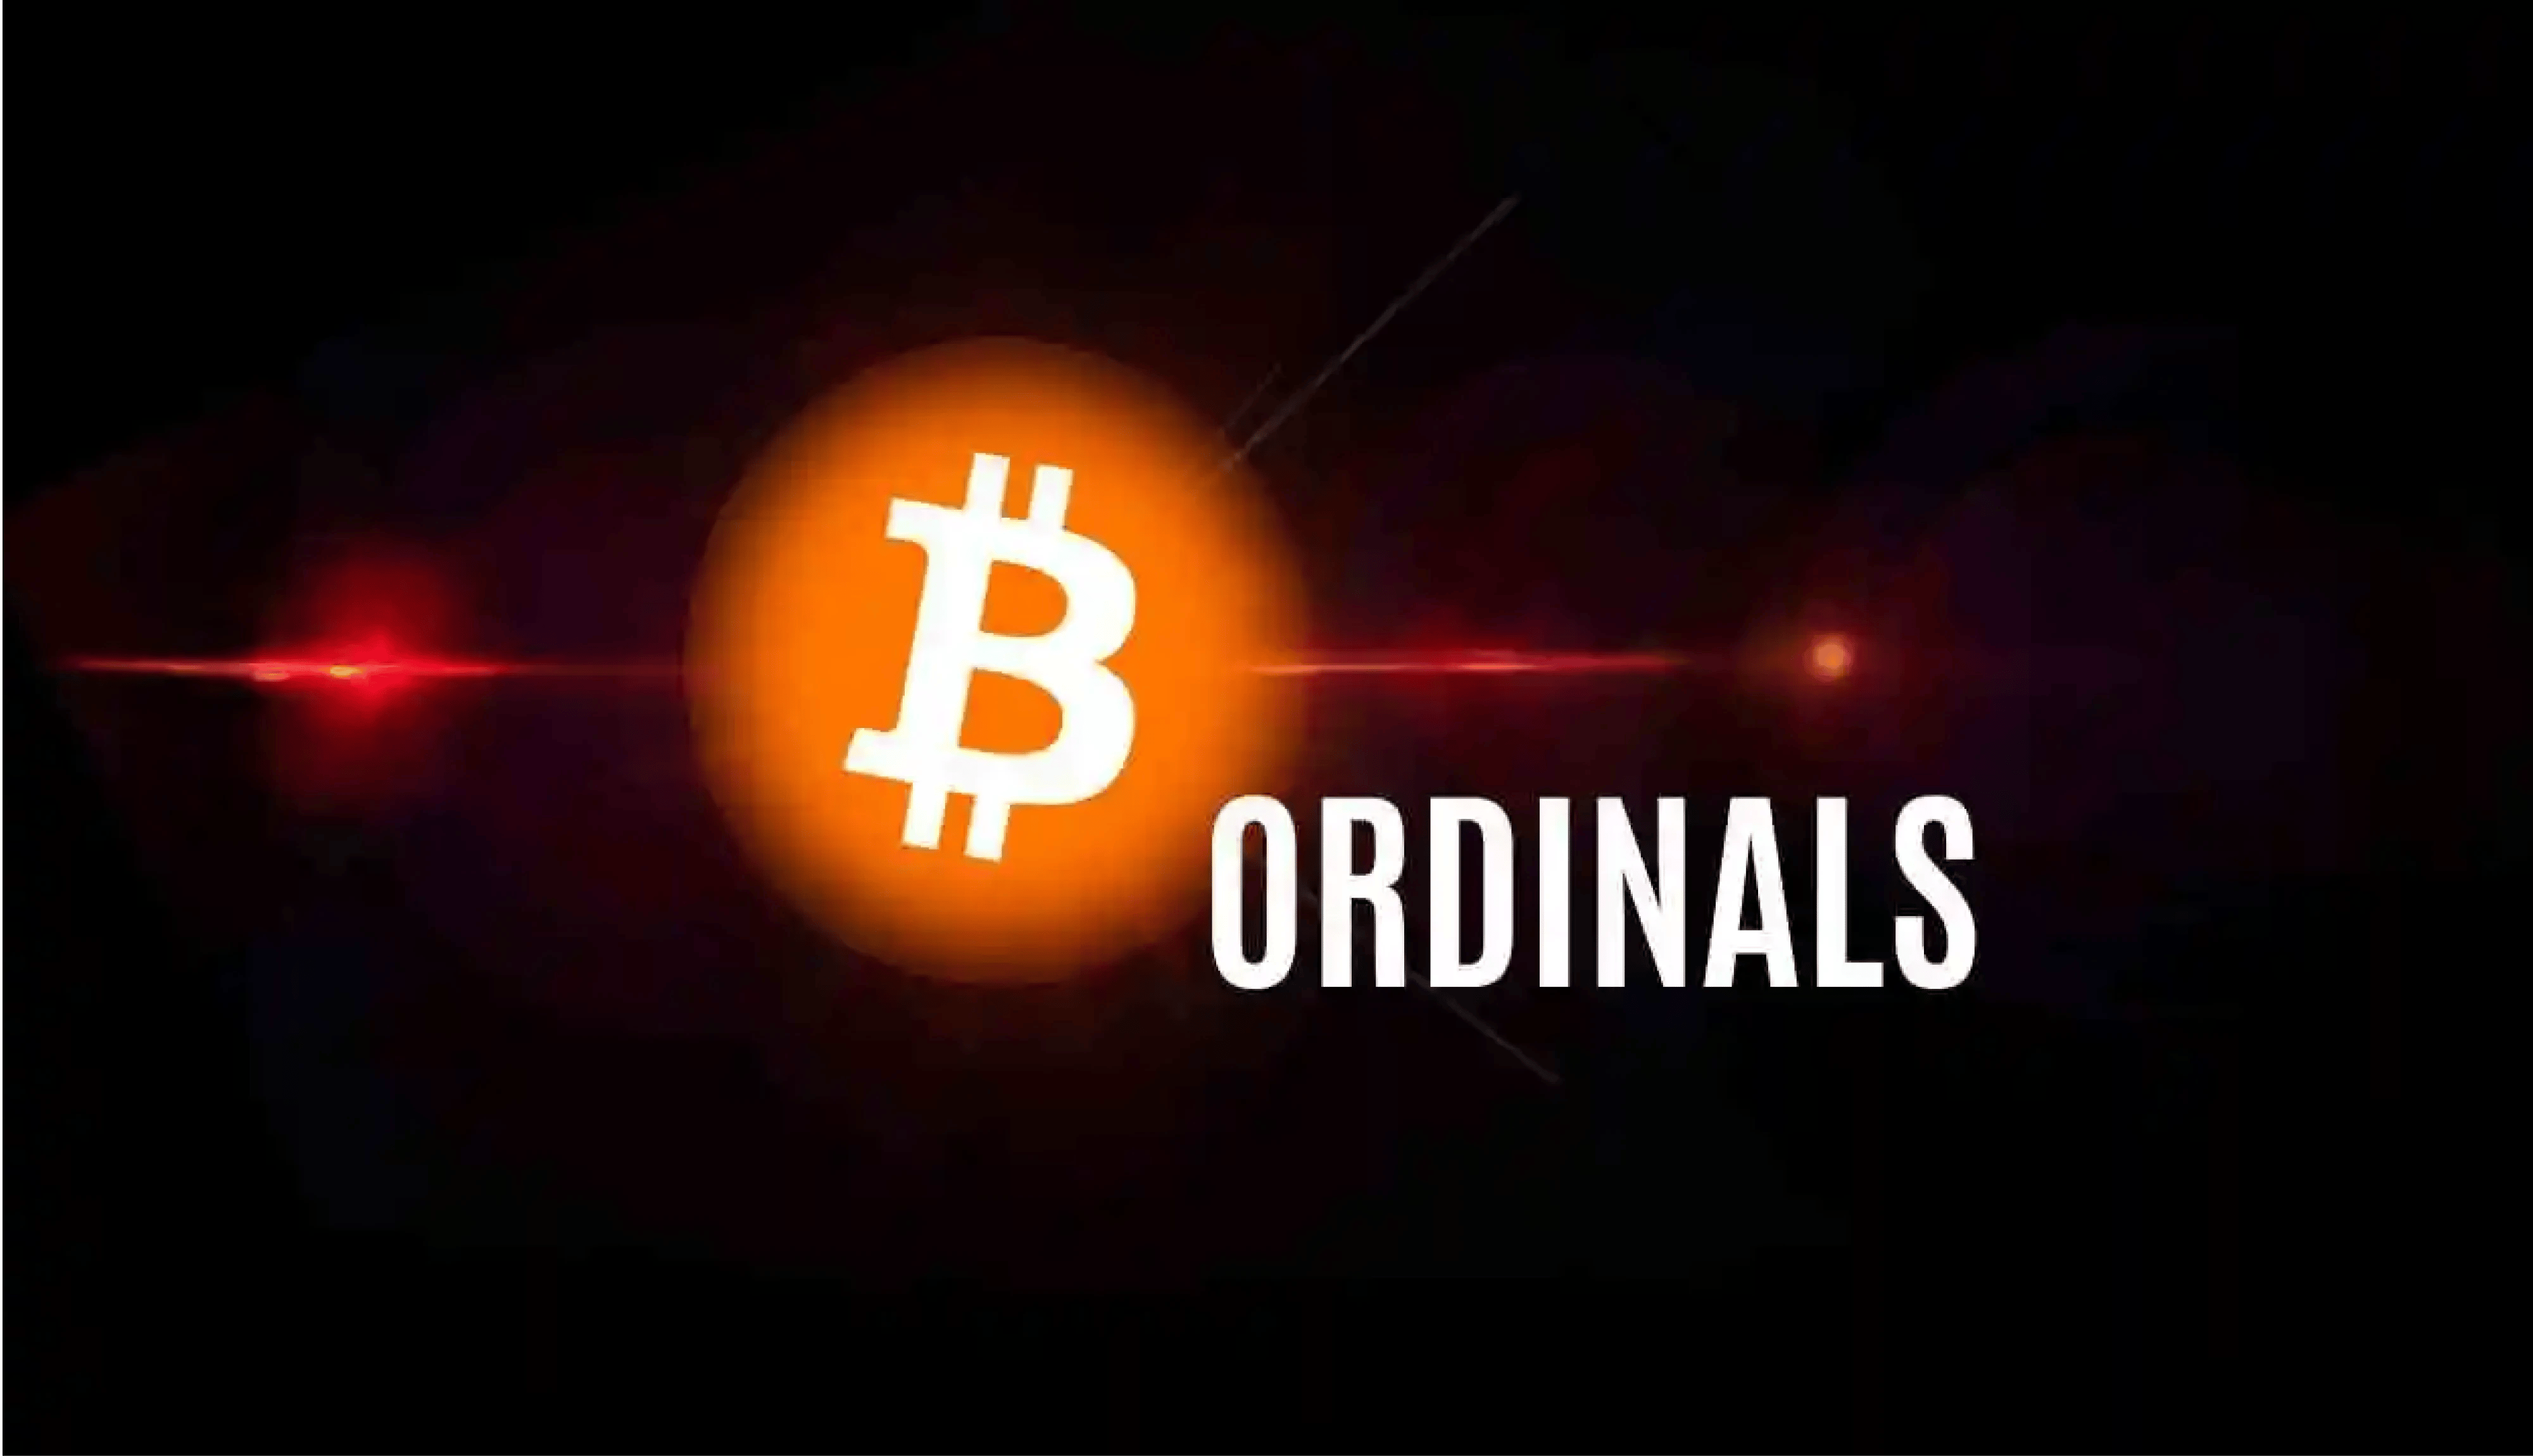 Proposed Solution to End Bitcoin Ordinals Exploitation